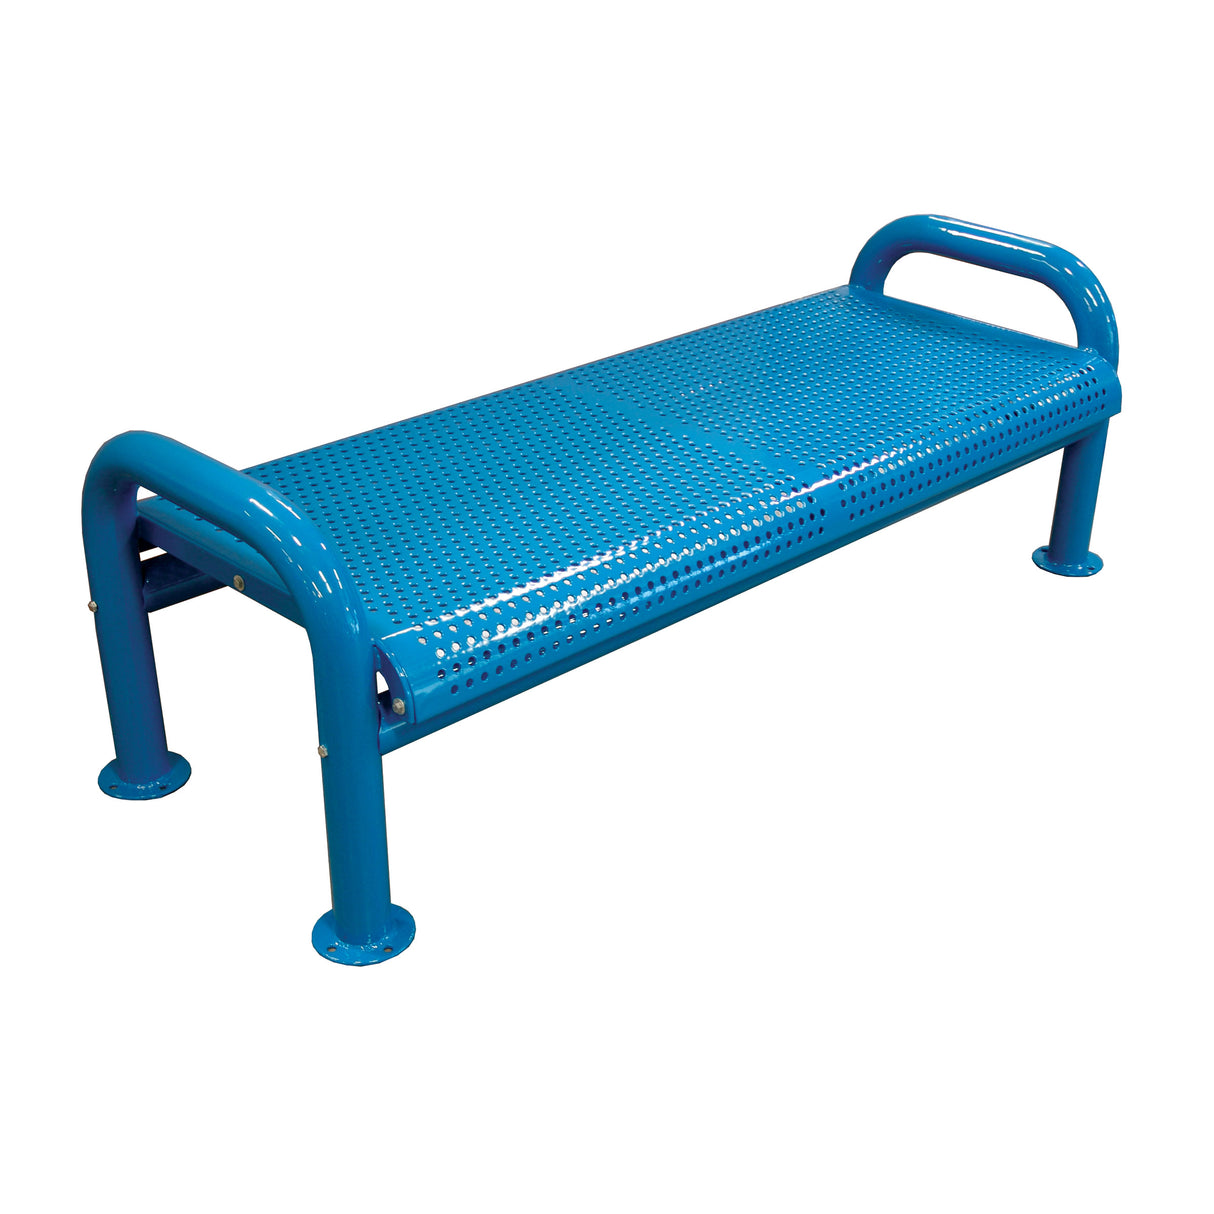 U-Leg Perforated Bench Without Back